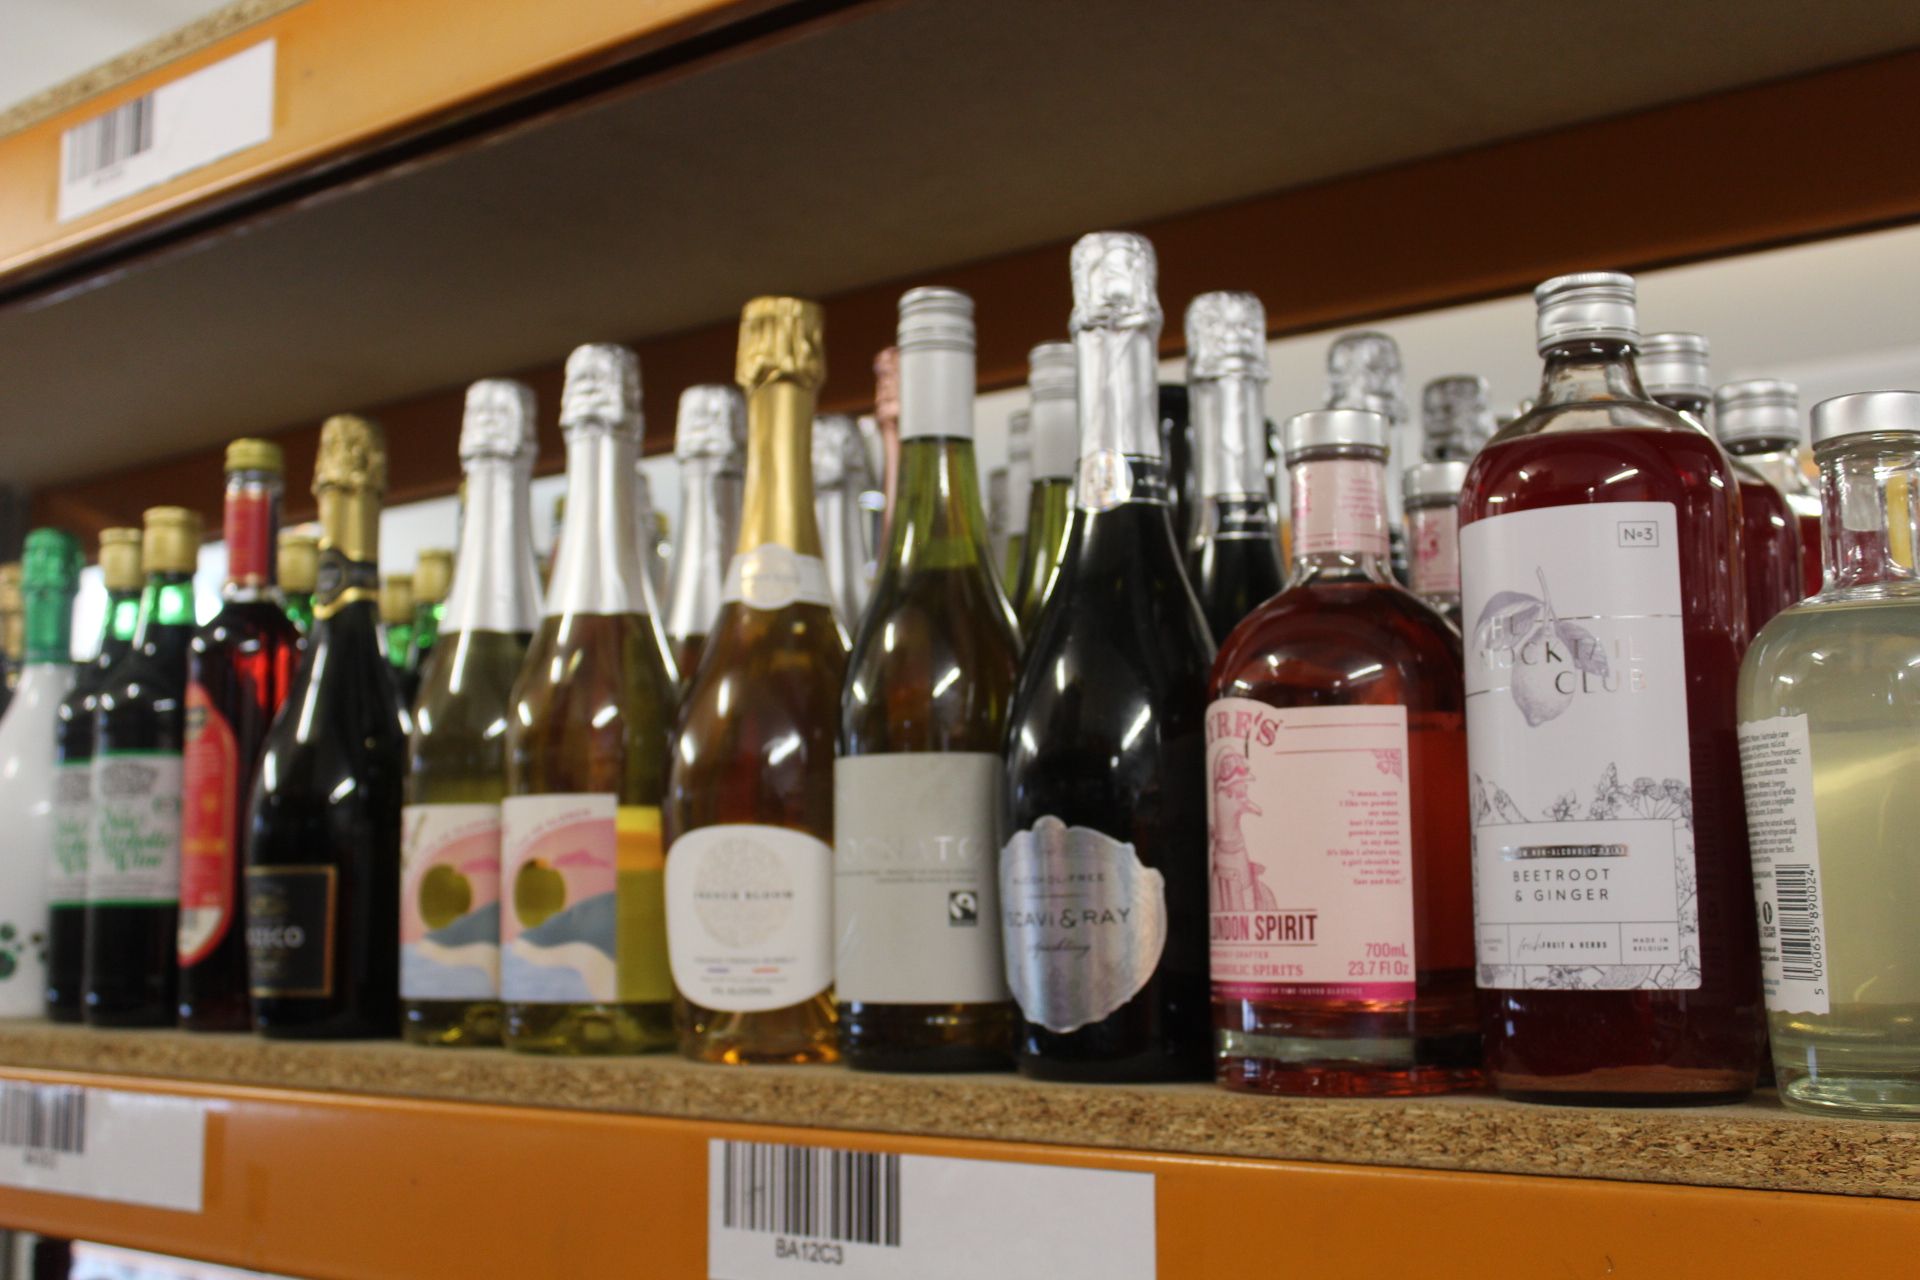 A quantity of Non Alcoholic Assorted Wines/ Larger/Spirits/Aperitifs (Approximately 80 Items).